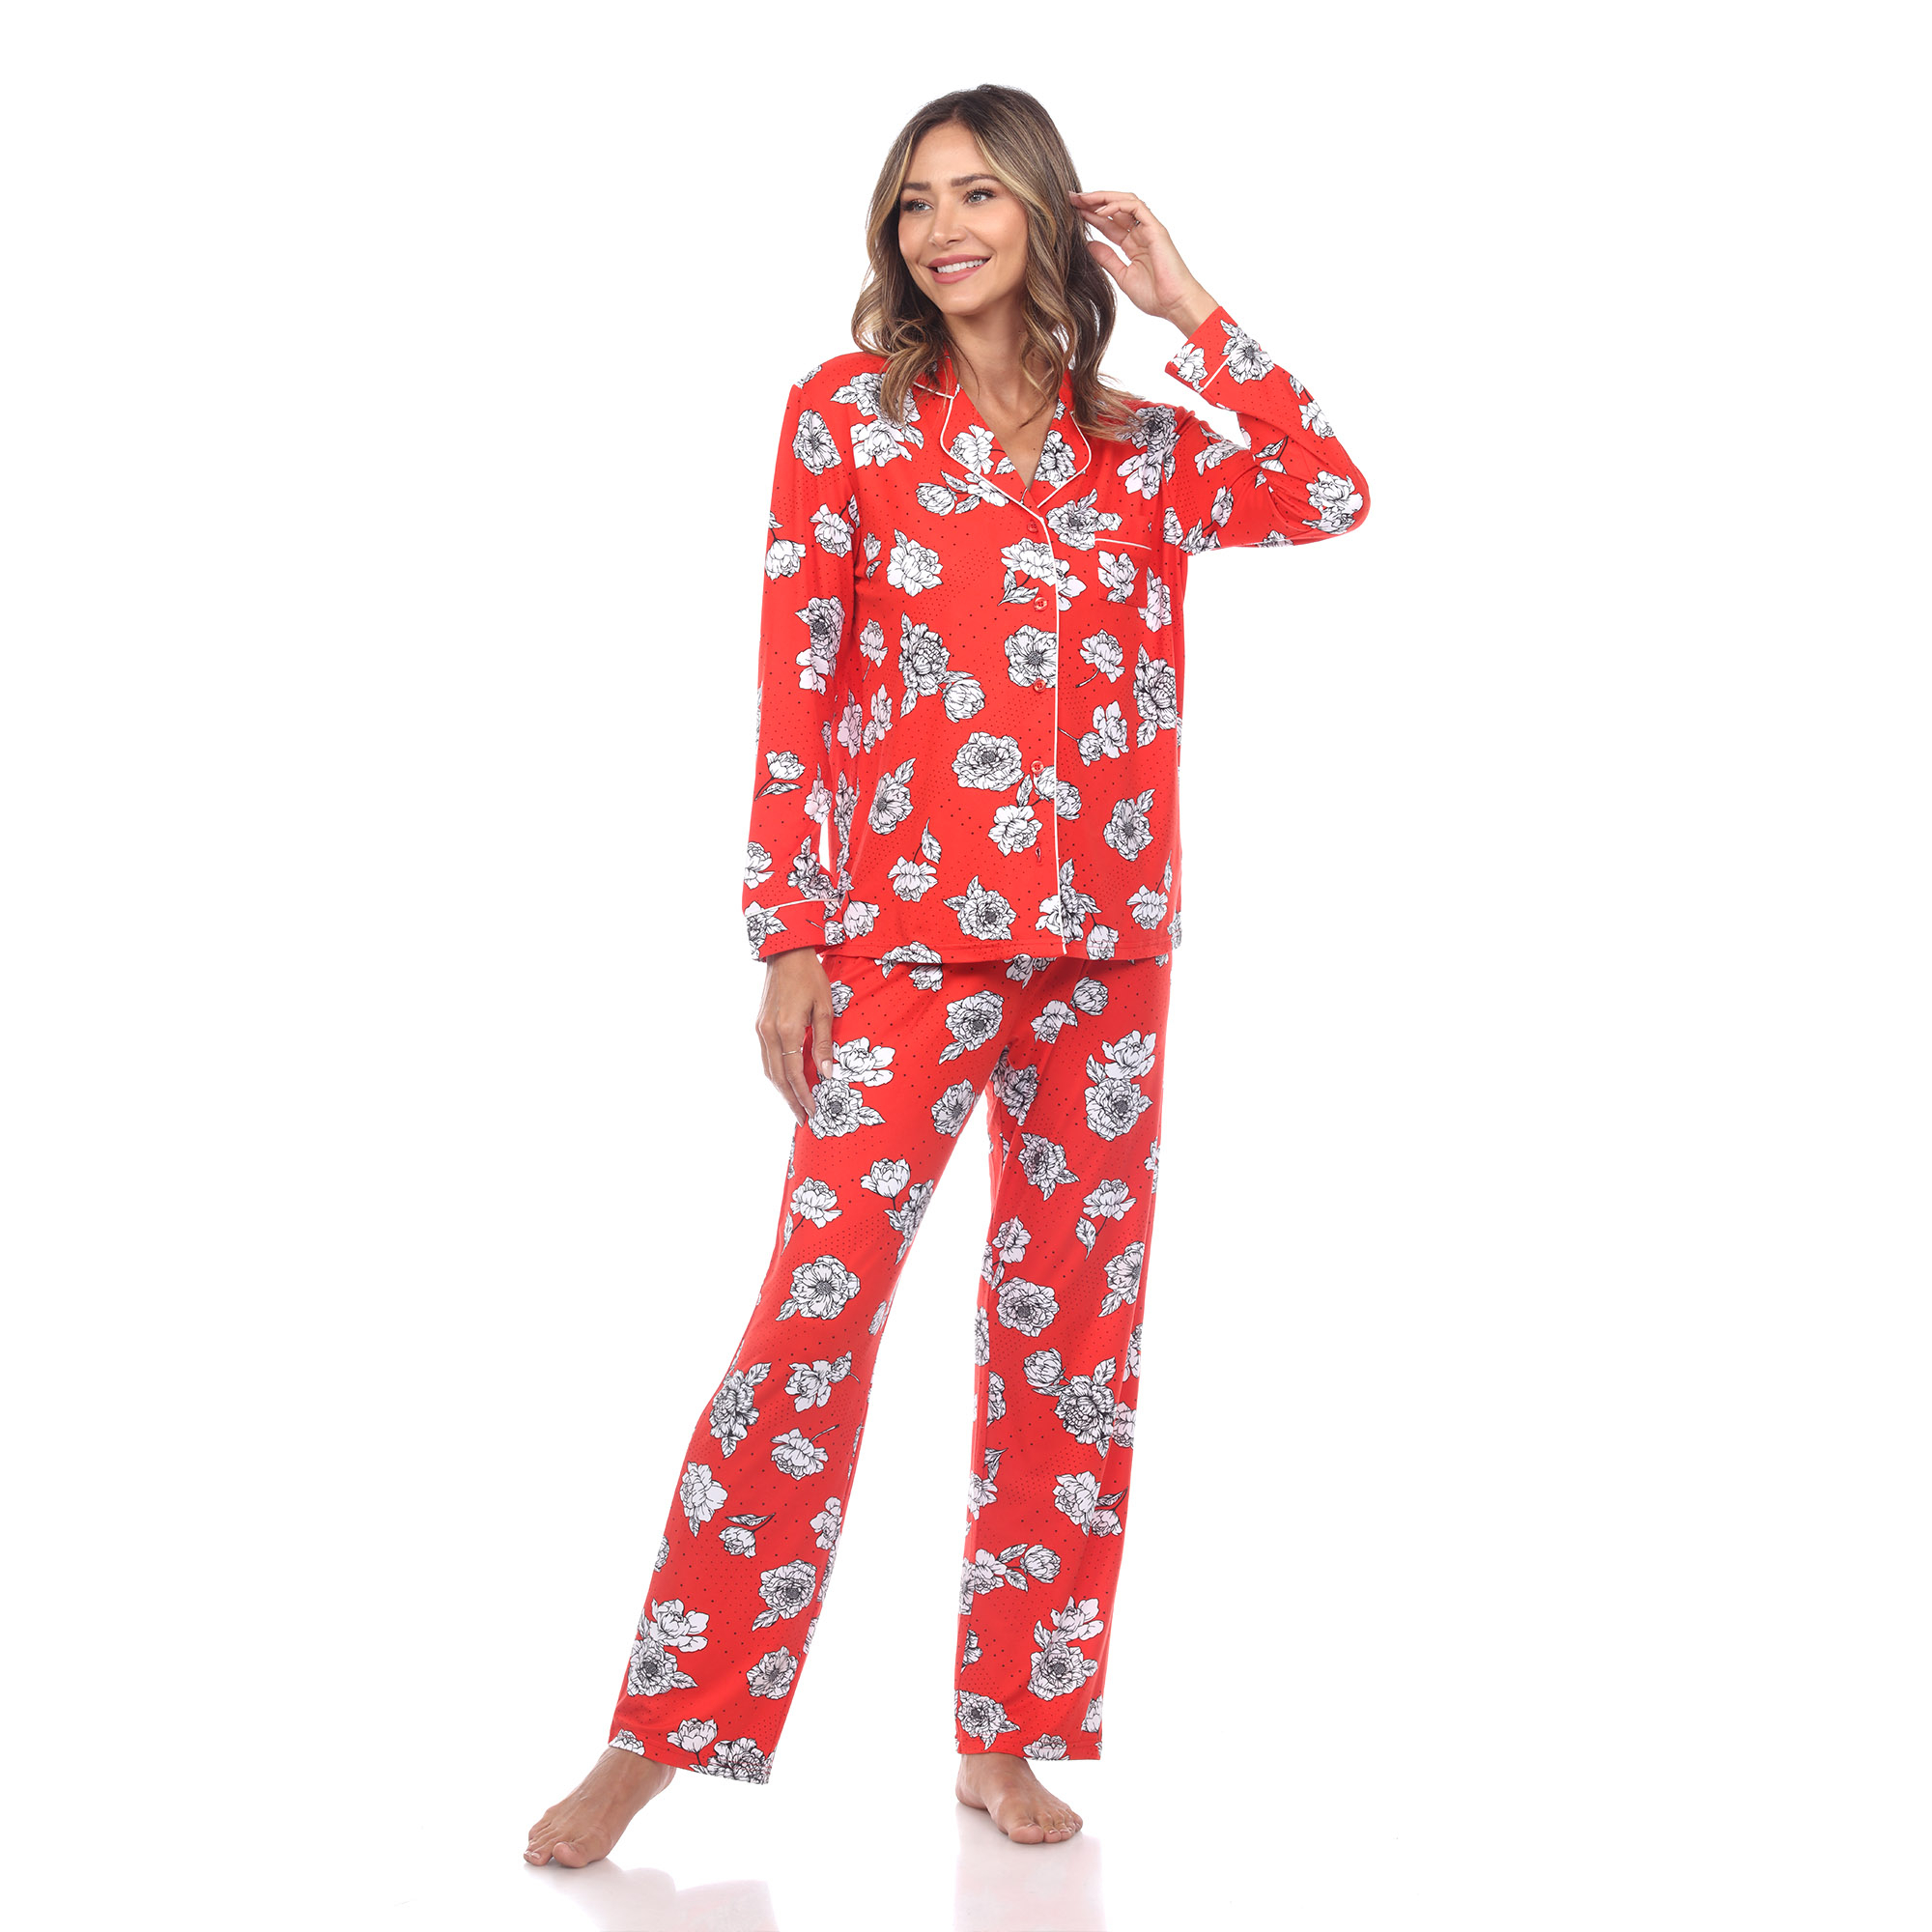 White Mark Women's Long Sleeve Floral Pajama Set - Red, Small